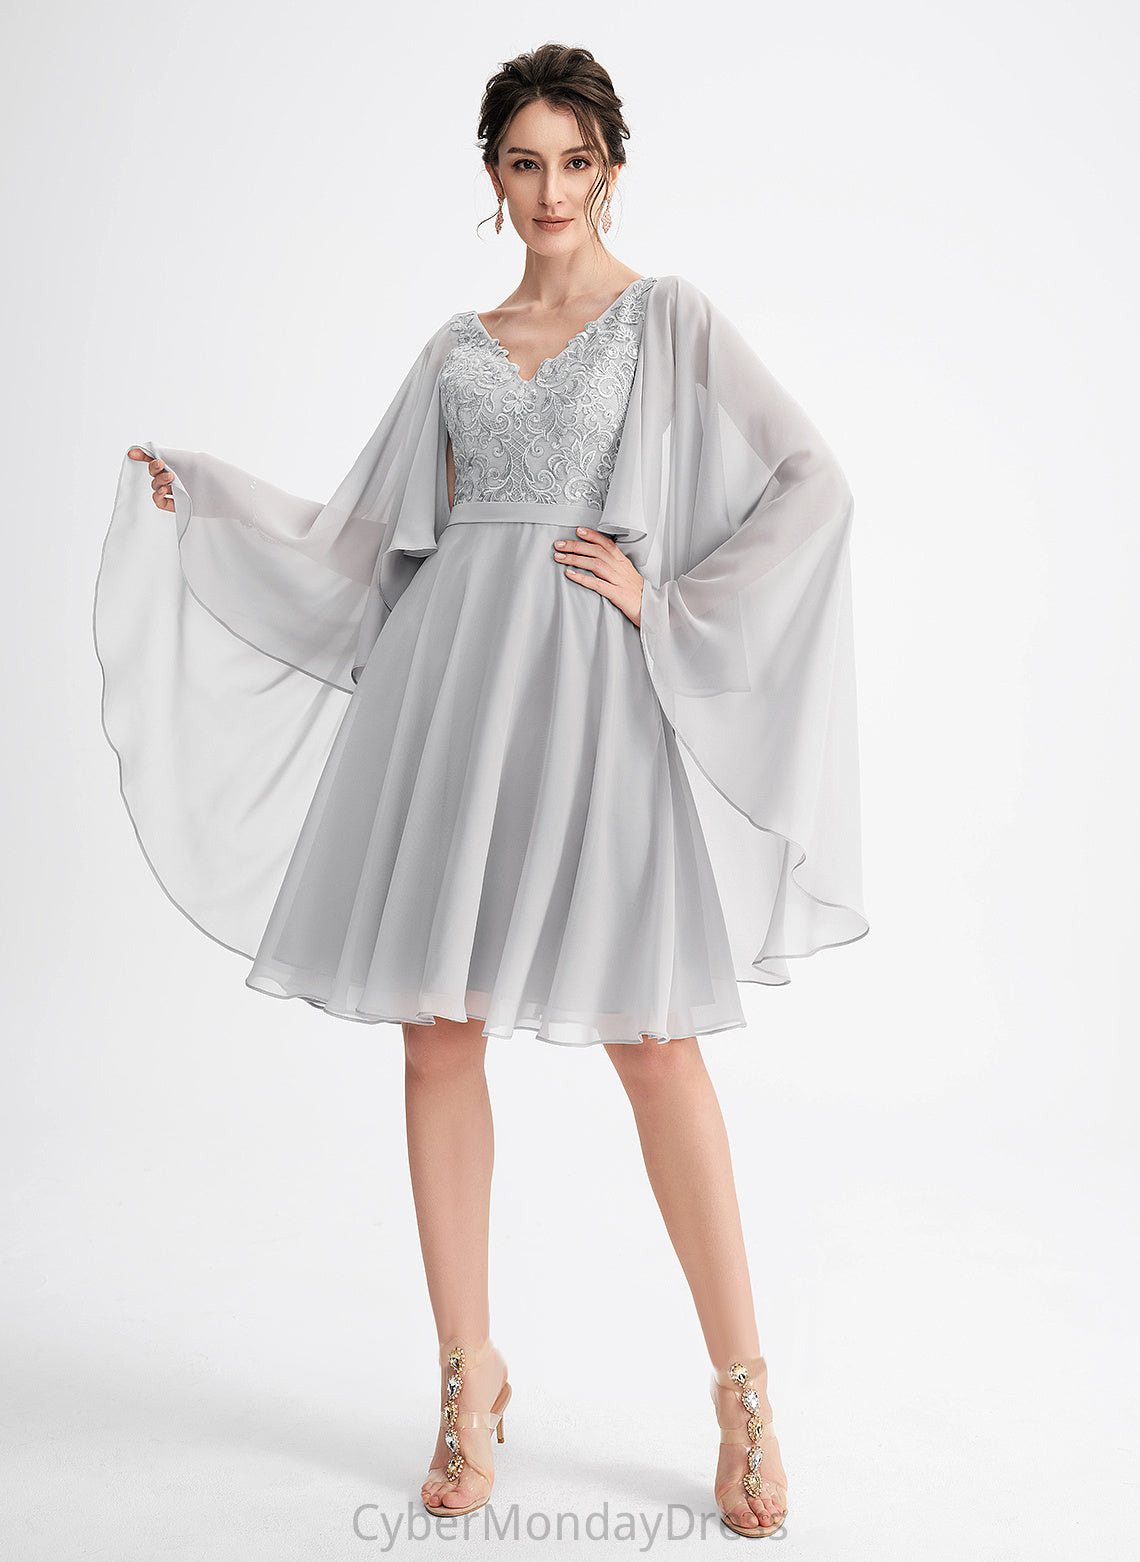 Dress A-Line Giovanna Knee-Length Cocktail Dresses Cocktail V-neck With Chiffon Lace